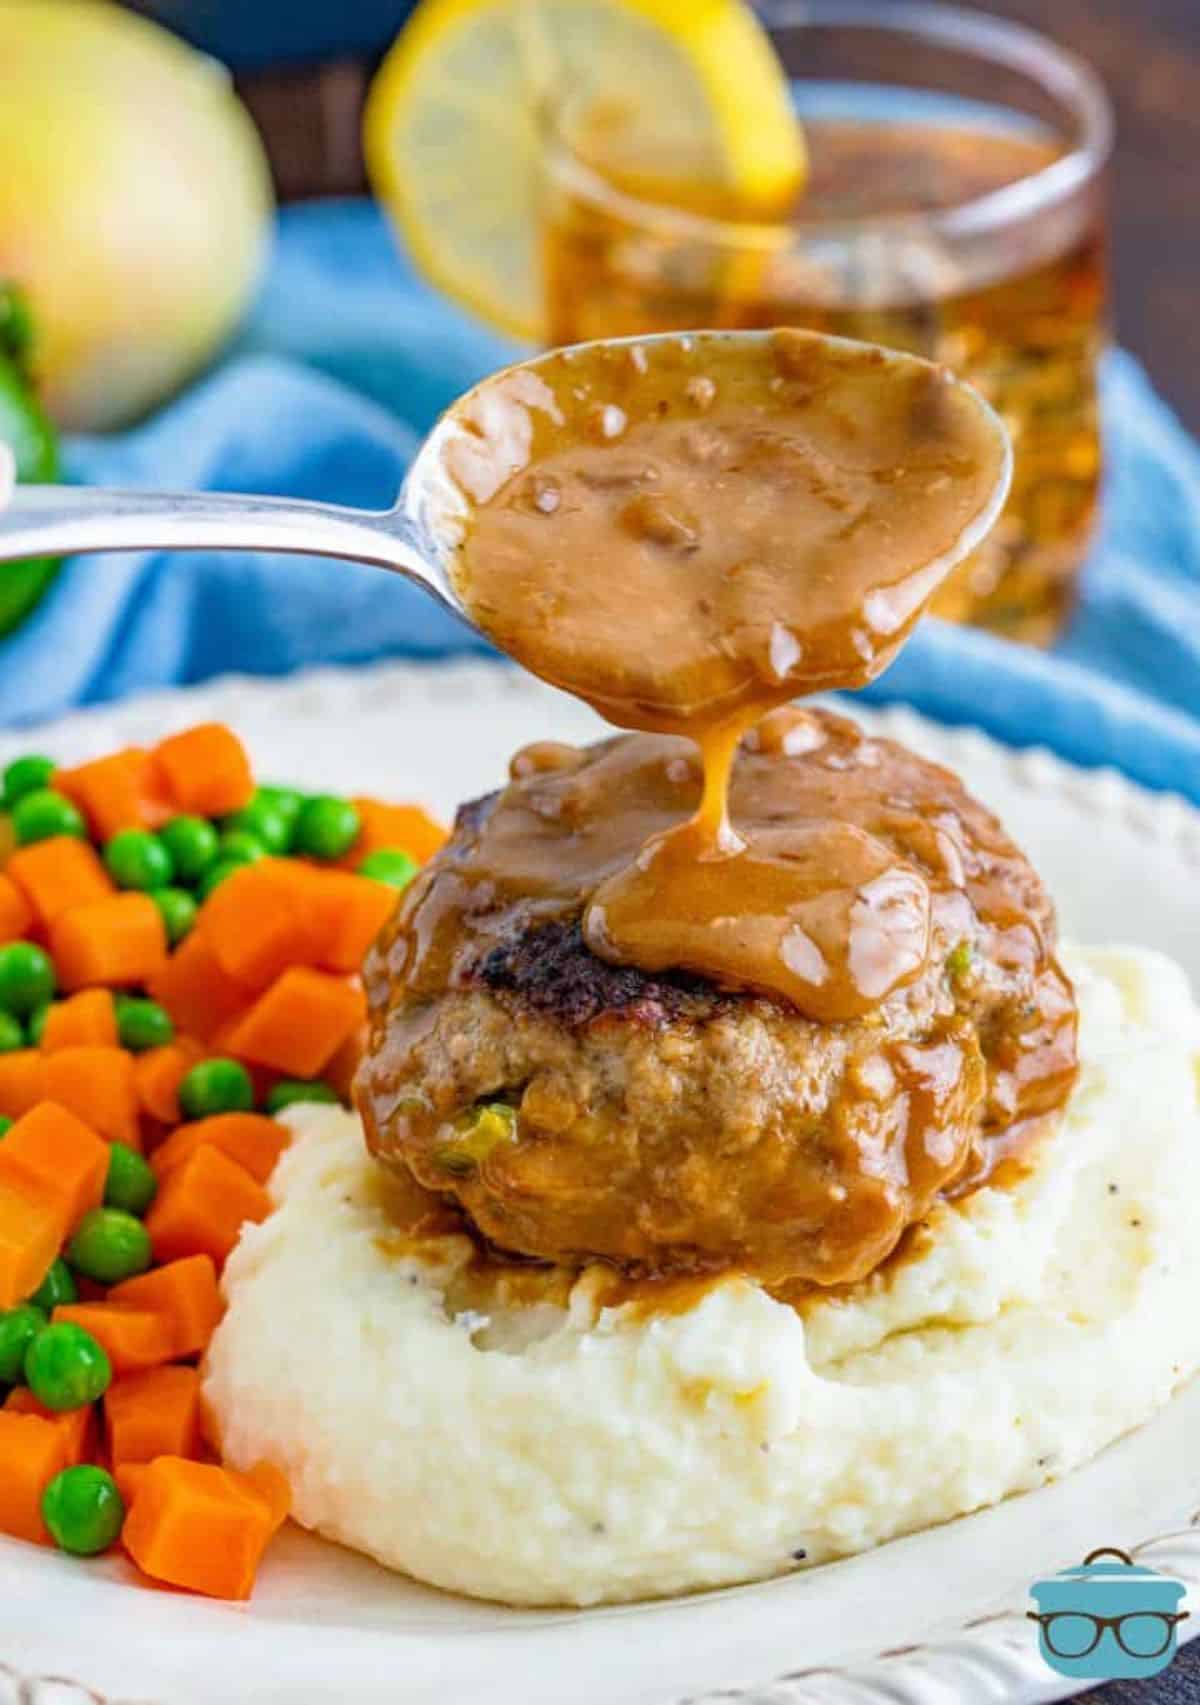 Hamburger steak poured with gravy with veggies on a white plate.